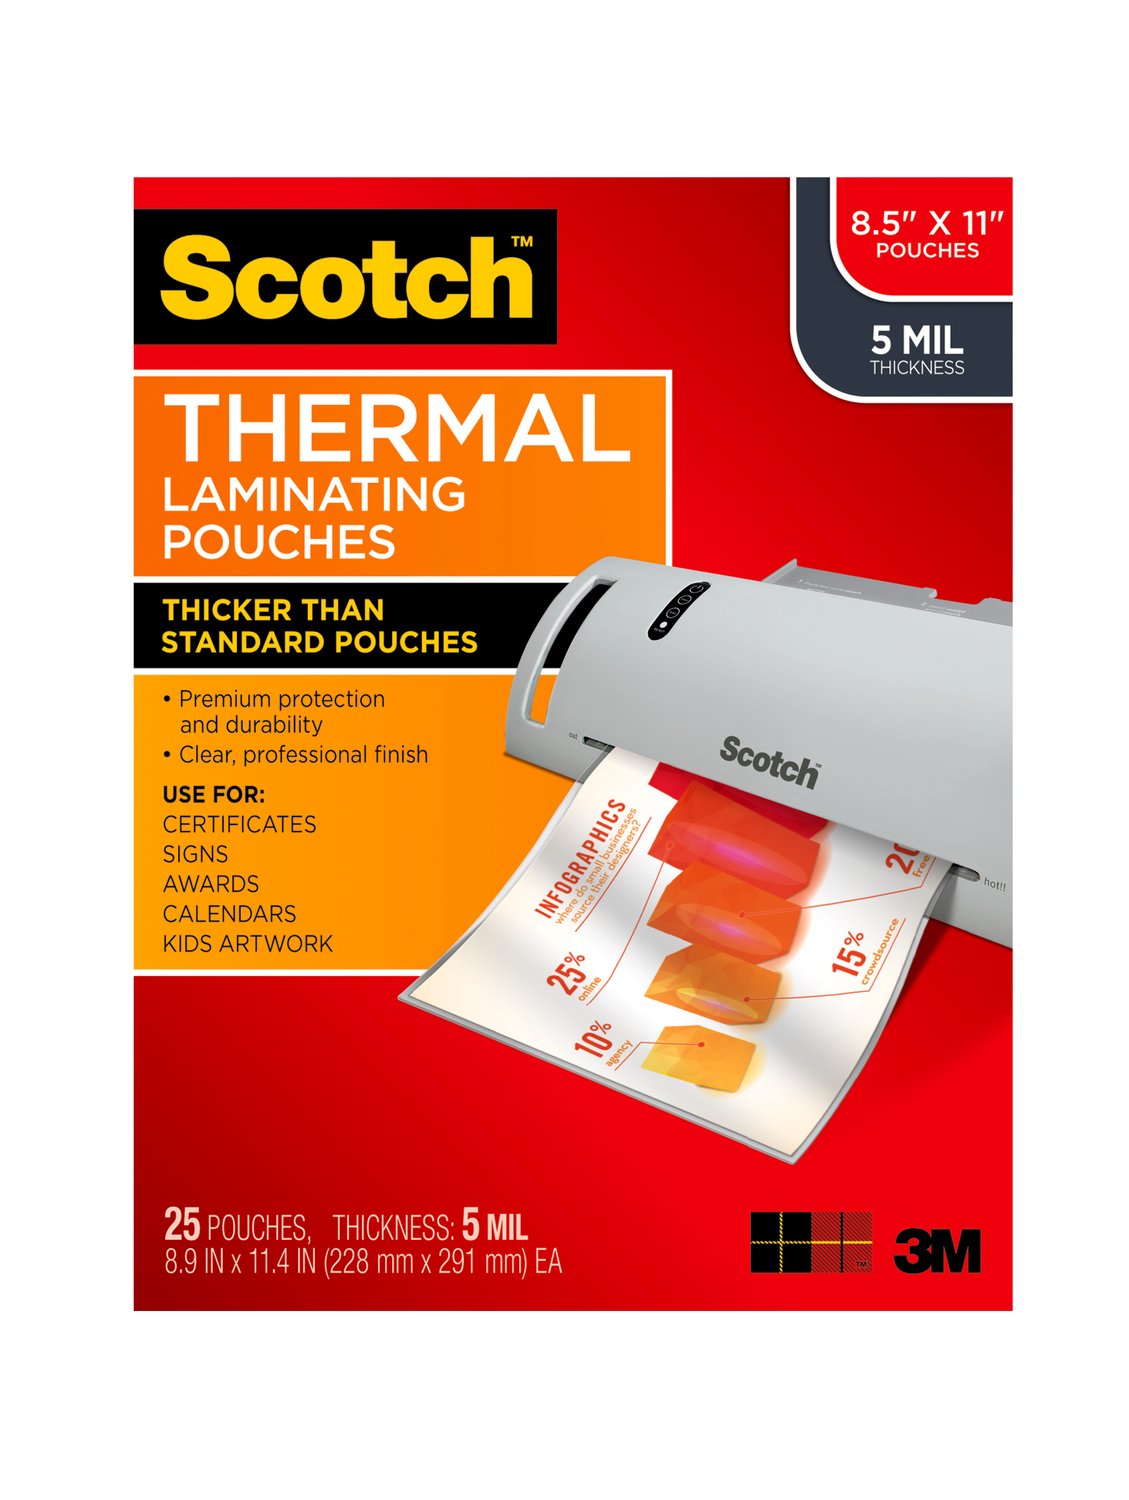 7100084214 - Scotch Thermal Pouches TP5854-25, 8.9 in x 11.4 in (228 mm x 291 mm),
Letter Size 5 mil